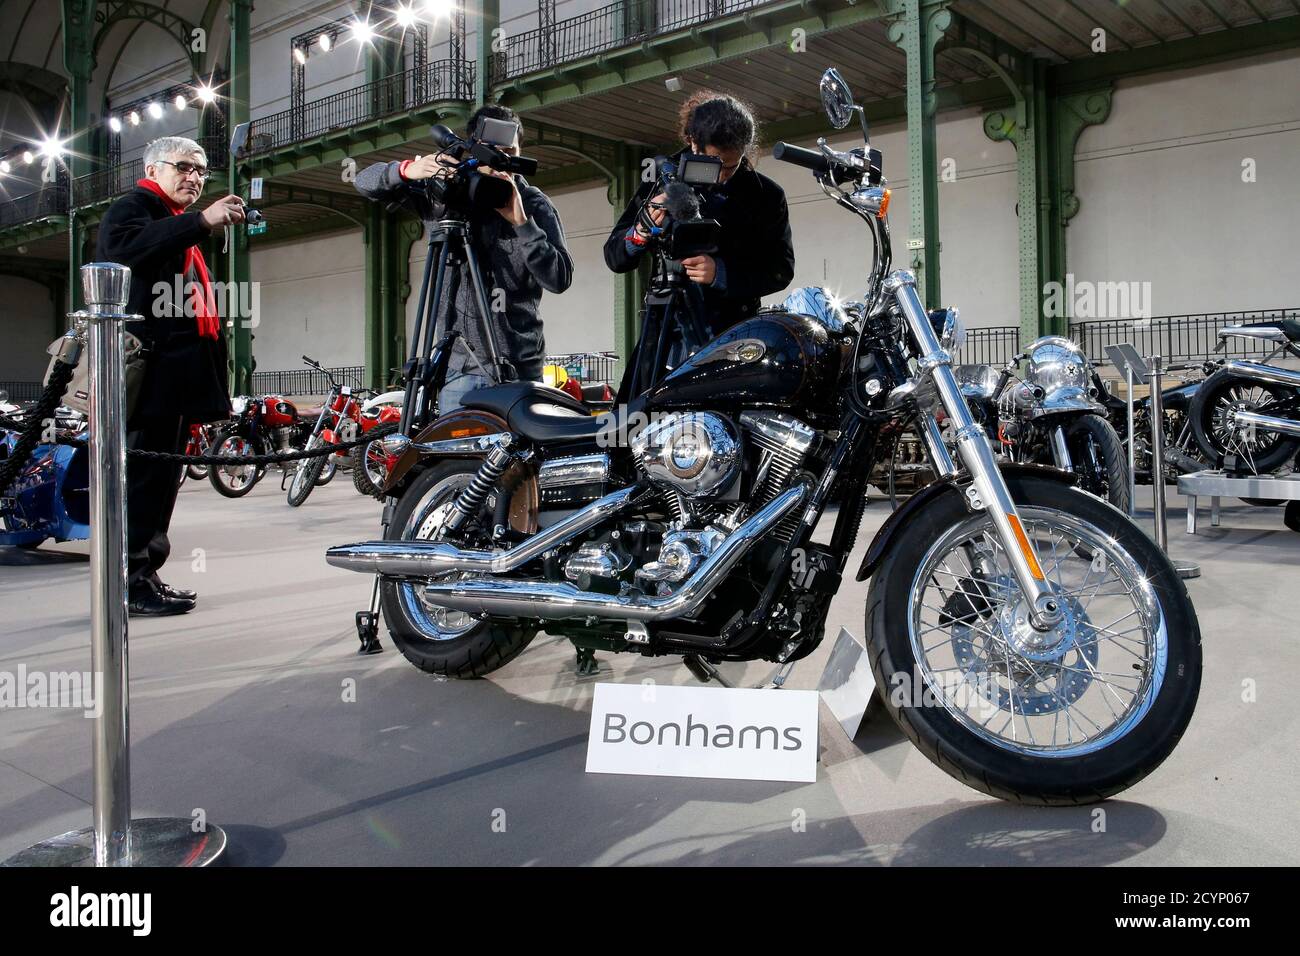 Cameramen Shoot The 1 585 Cc Harley Davidson Dyna Super Glide Donated To Pope Francis Last Year And Signed By Him On Its Tank Which Is Displayed As Part Of Bonham S Les Grandes